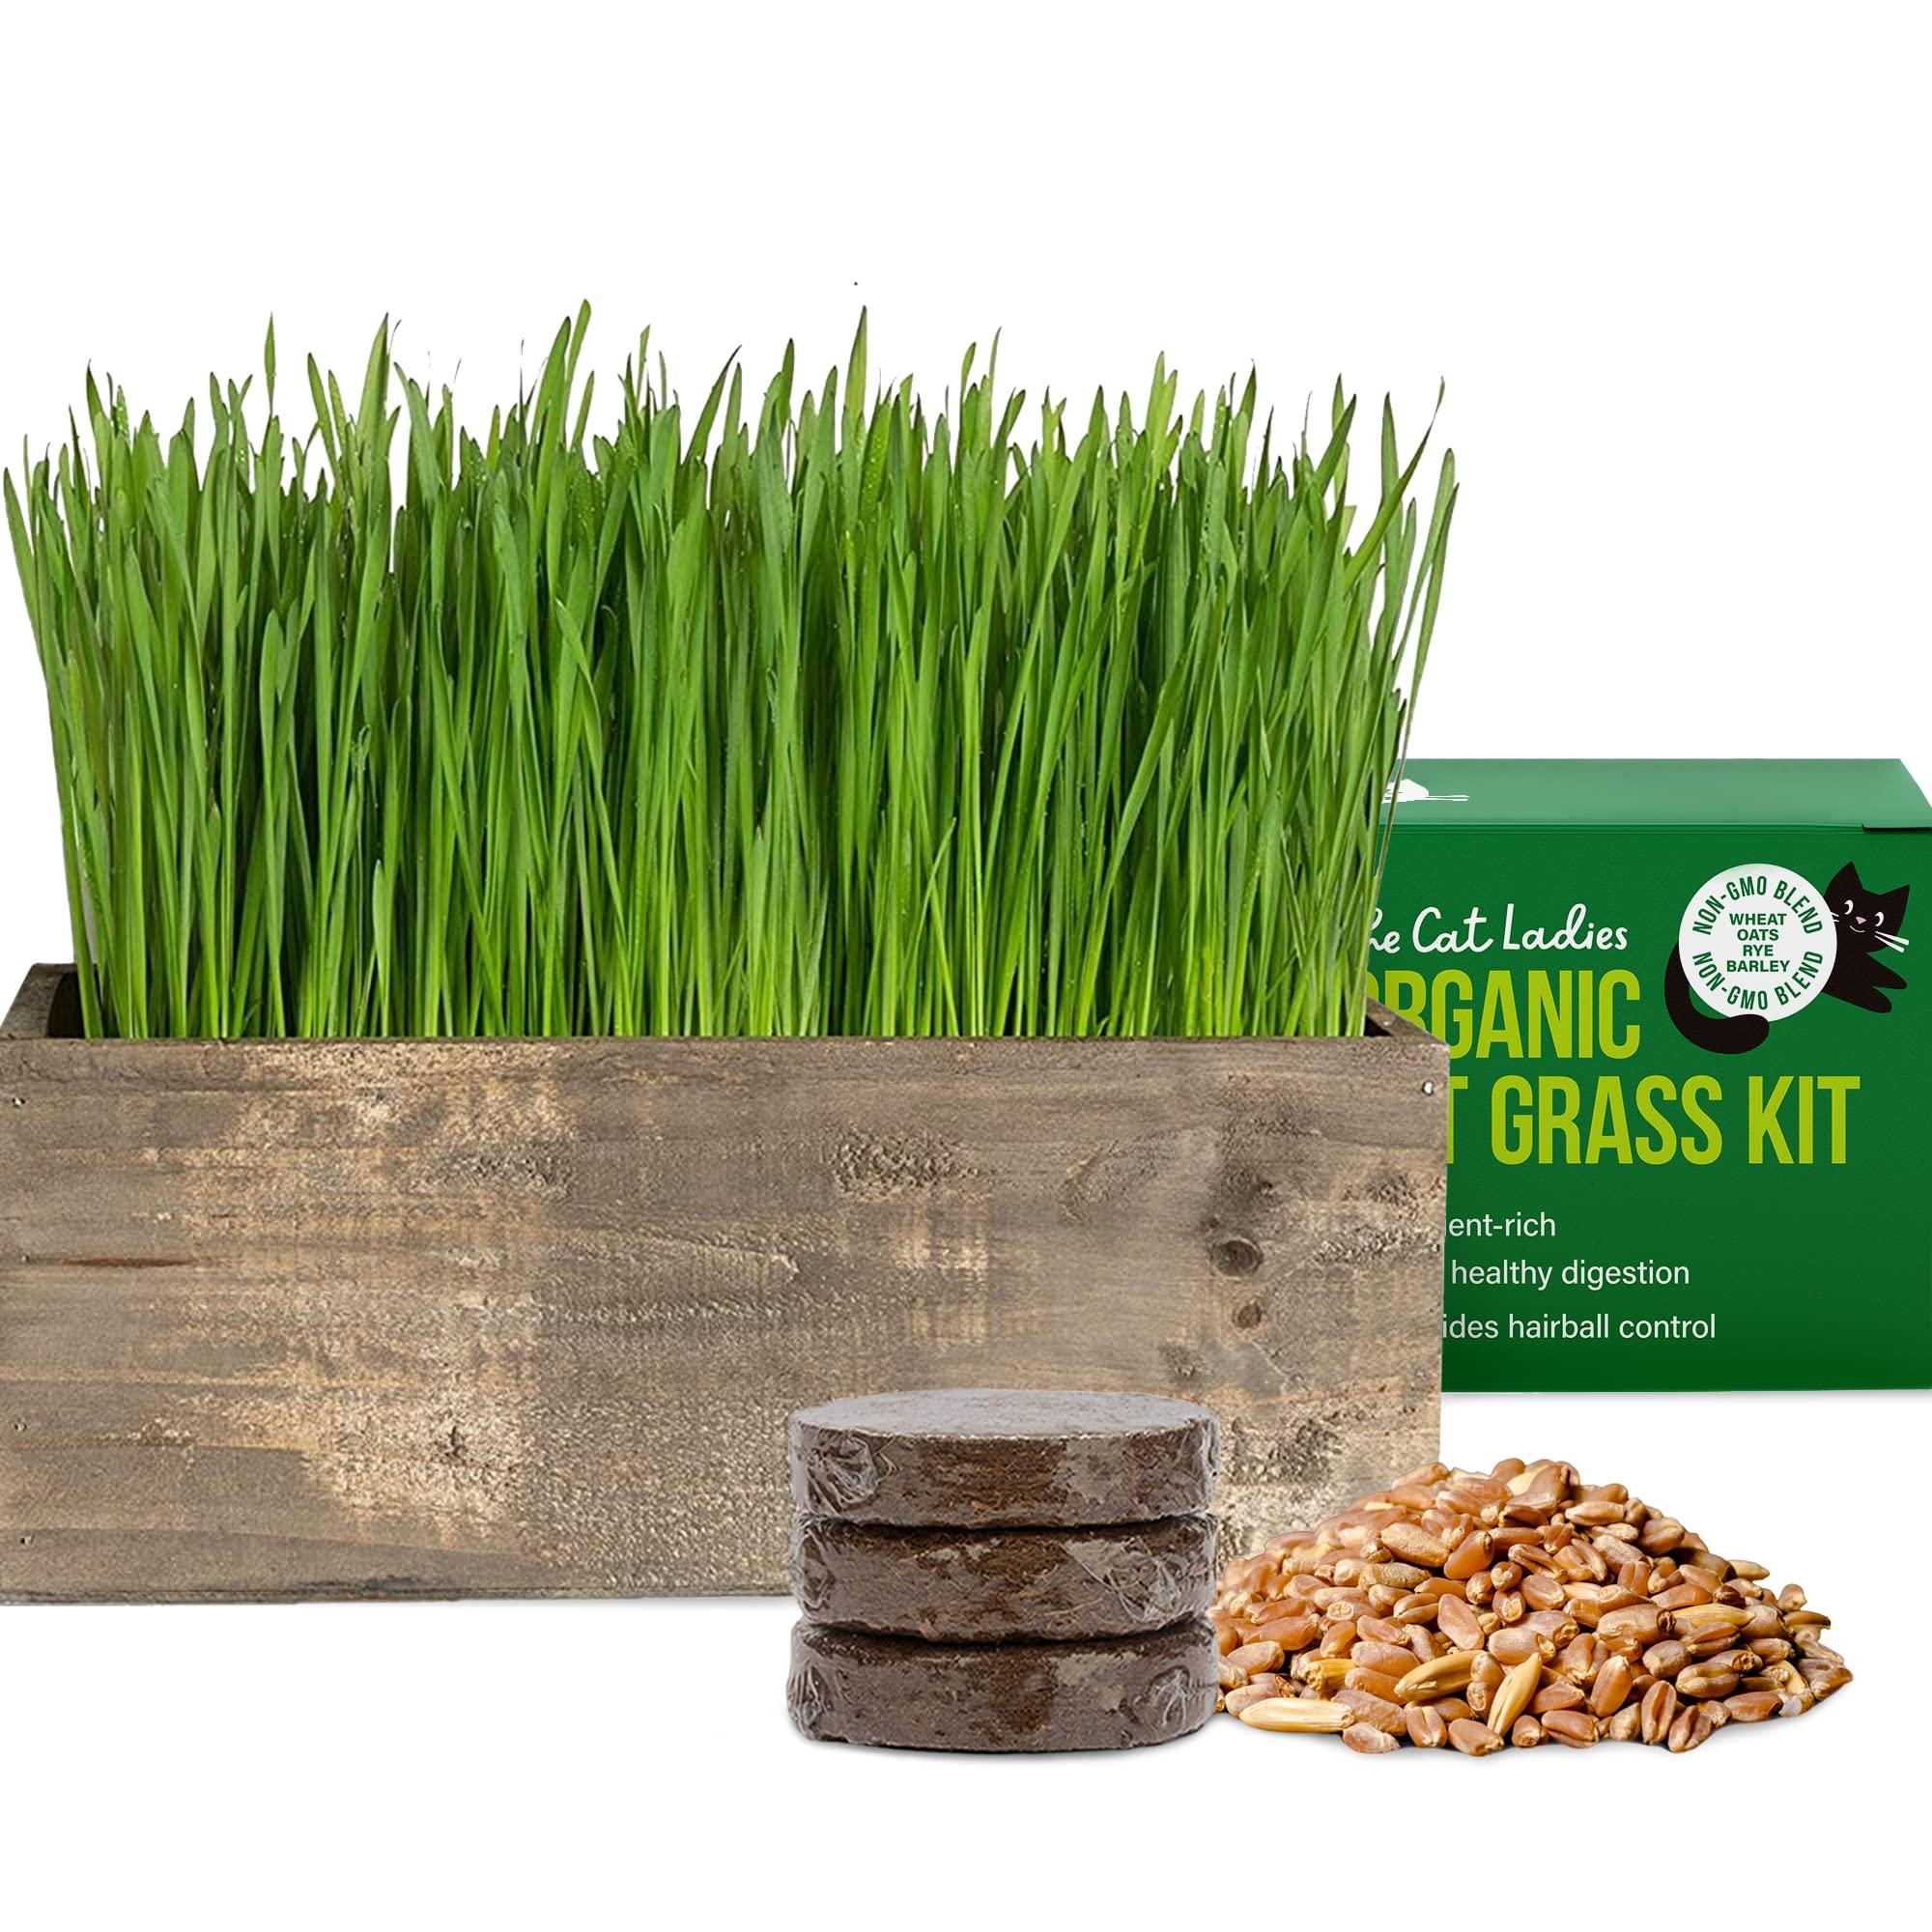 The Cat Ladies Cat Grass Kit Complete with Rustic Wood Planter, Organic Seed and Soil. Easy to Grow - Great for Indoor or Outdoor Cat, Dogs and Other Pets. Prevent Hairballs and Aid Digestion